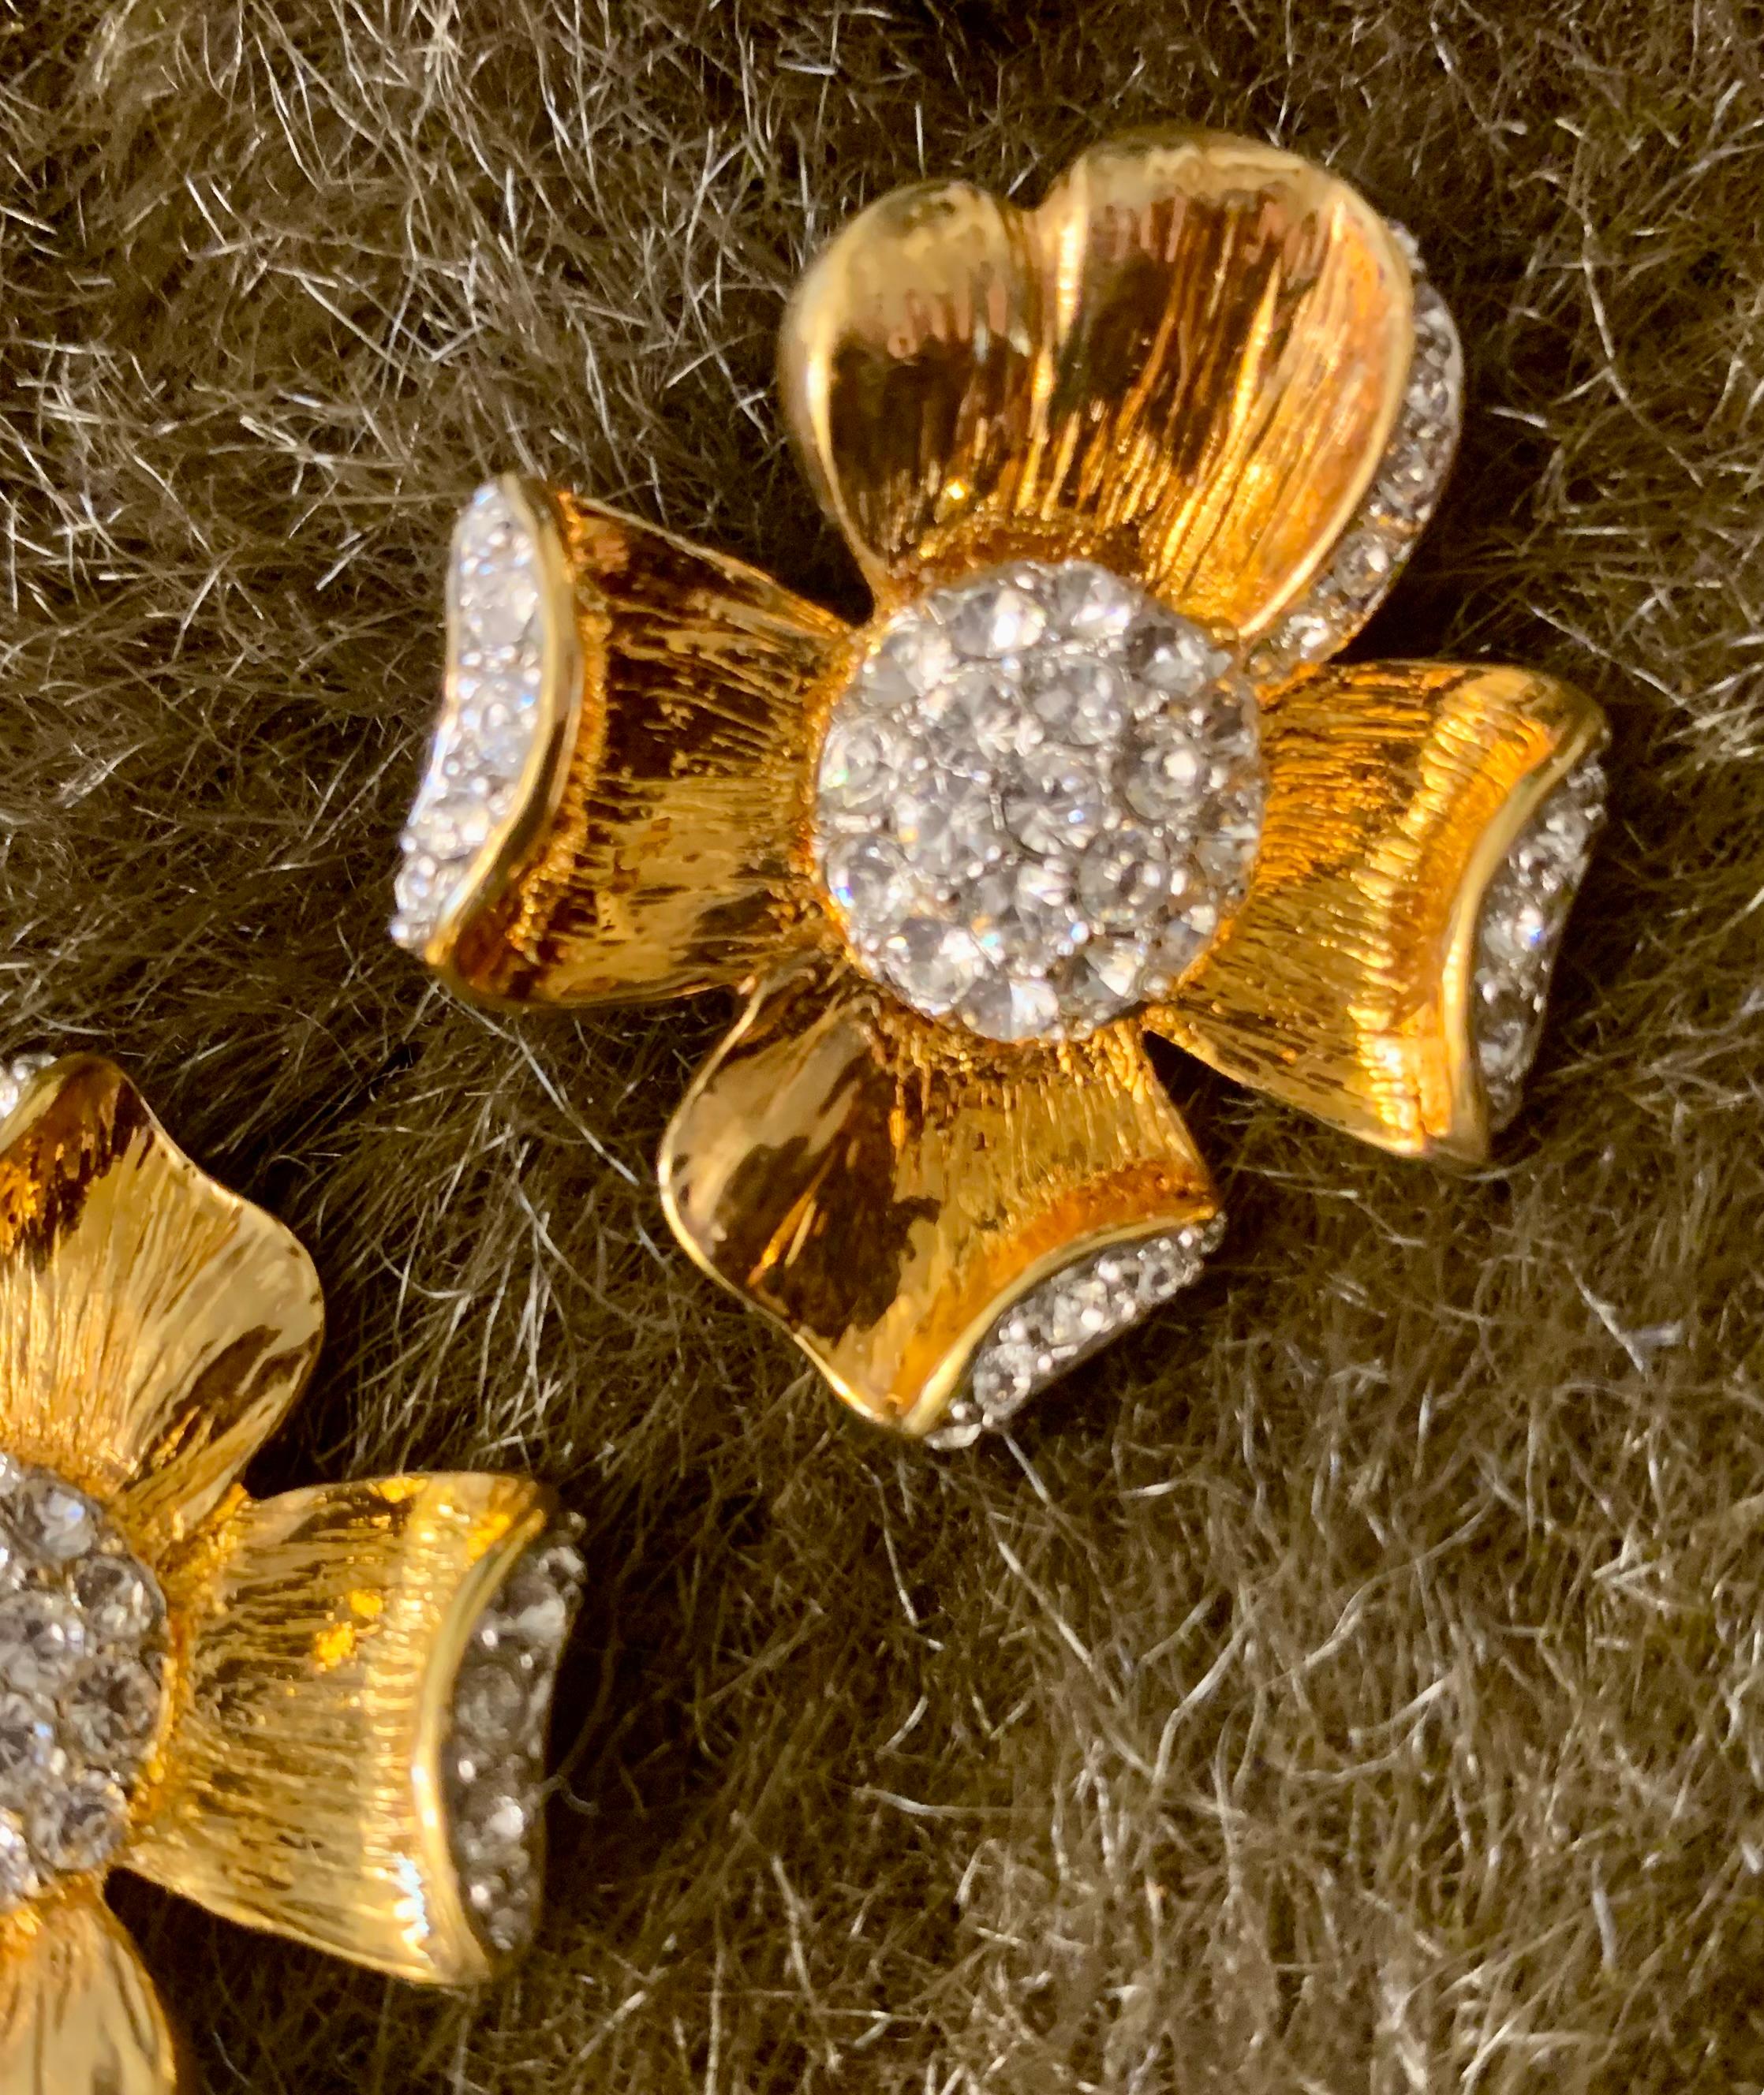 From the Dynasty TV show era, a NIB pair of chic Flowe Blossum clip earrings. Textured gold plate with beautiful rhinestone centers. This collection included a faux pearl bracelet with larger flower accent. (Ours available on separate listing).